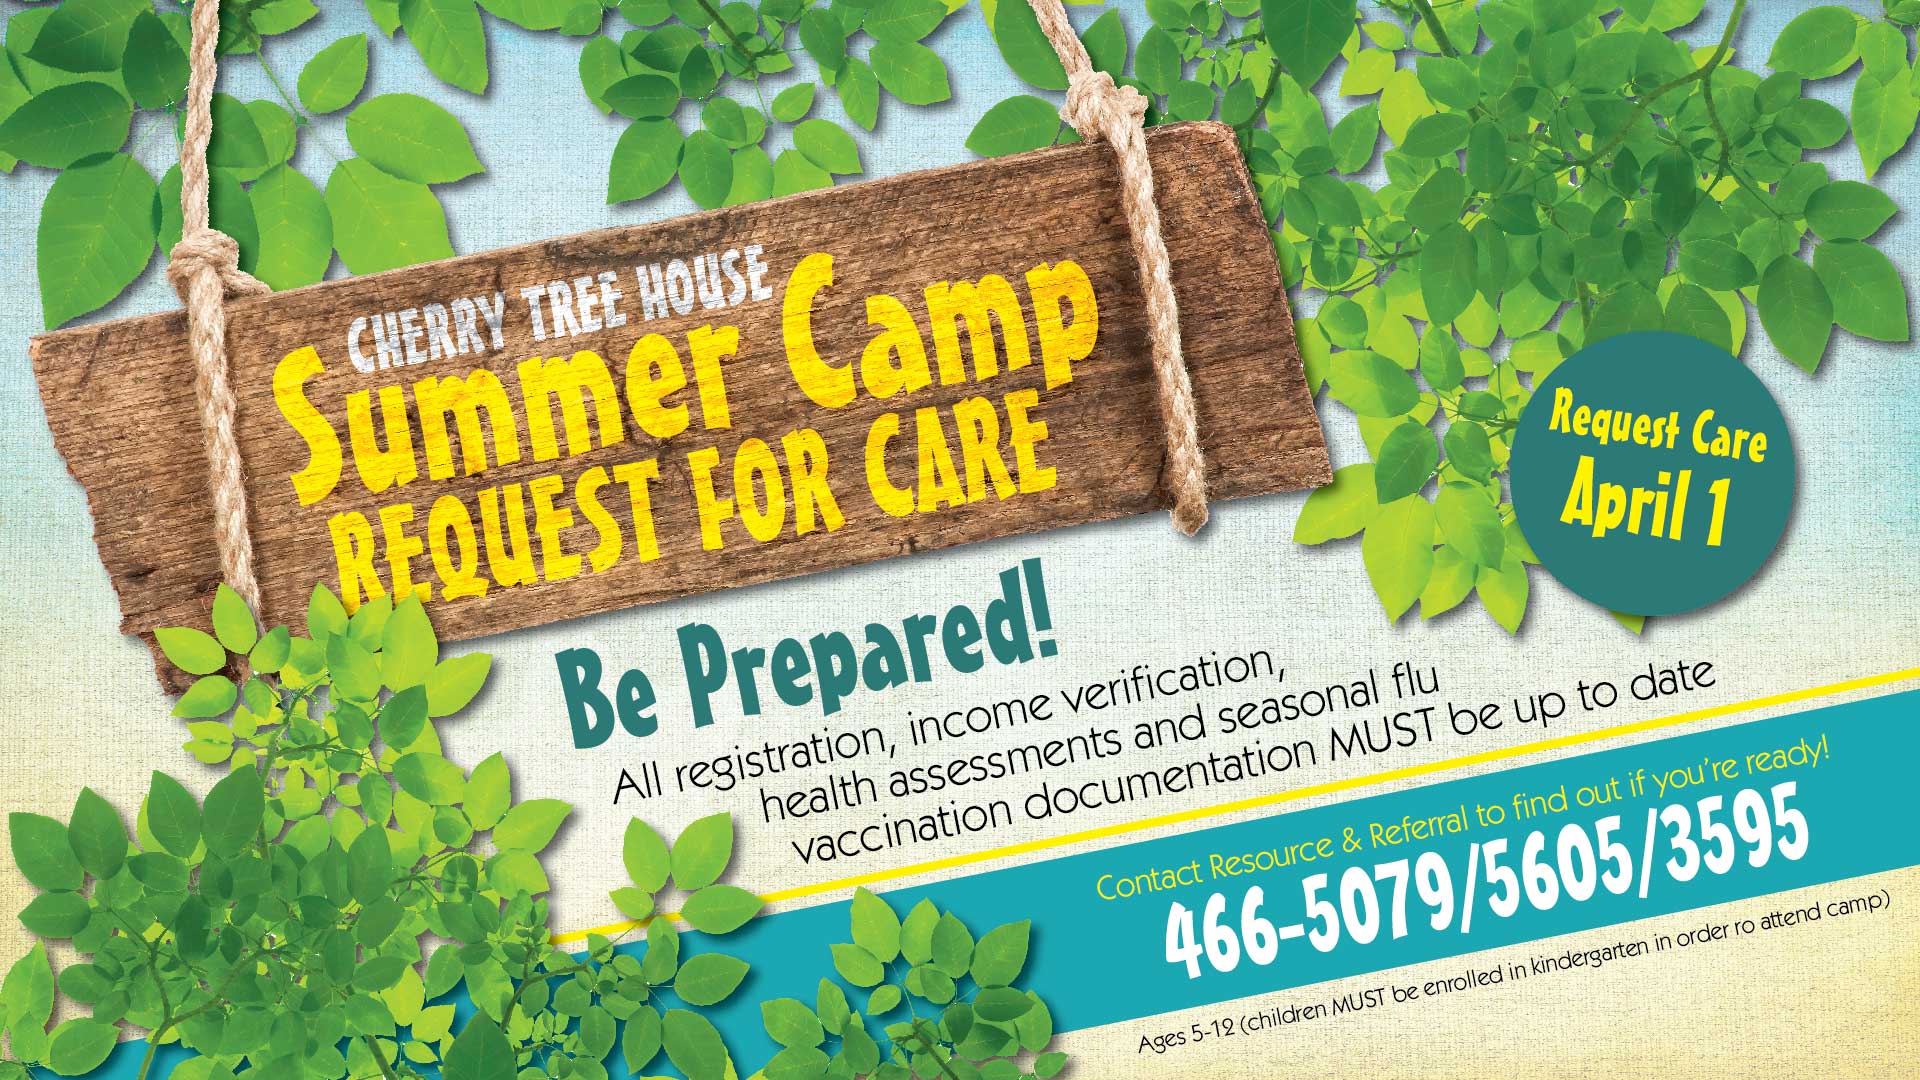 ad for summer camp